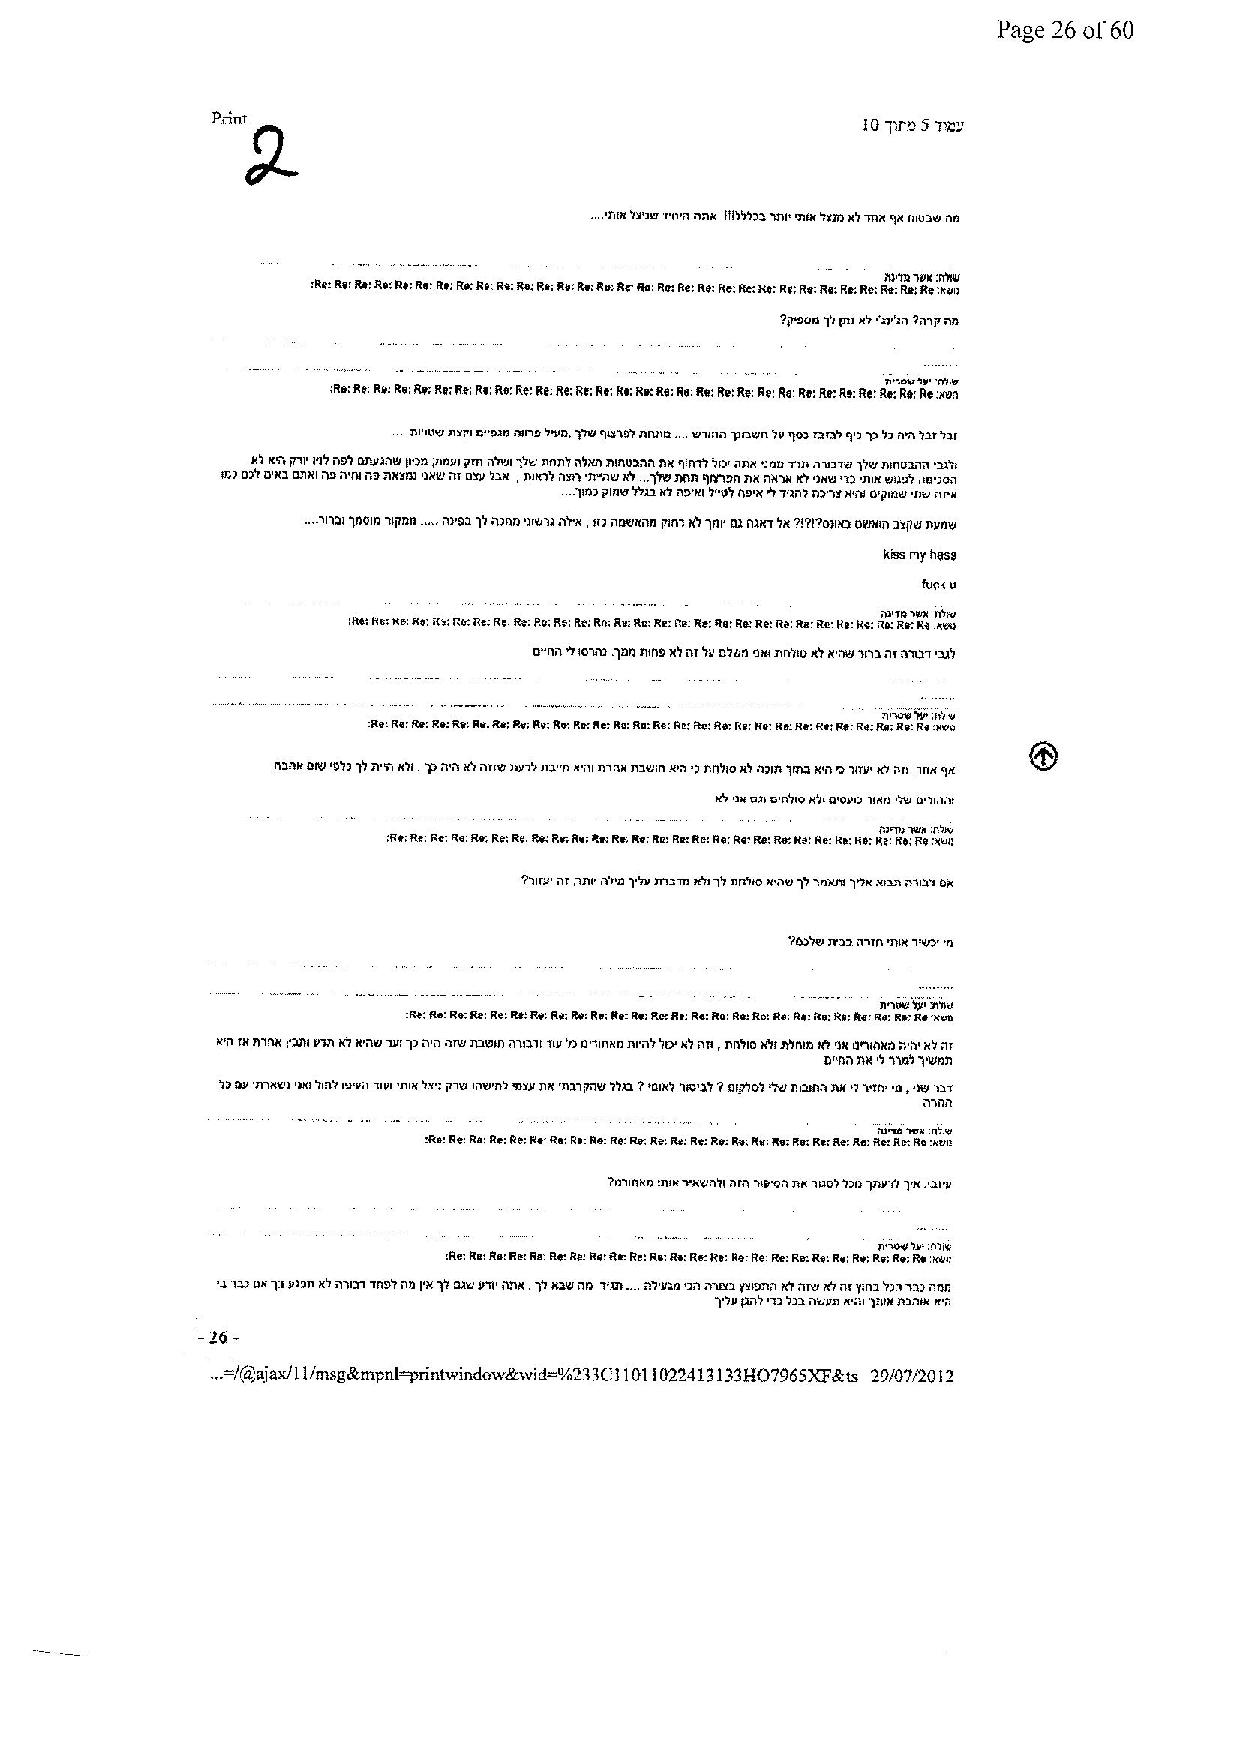 document-page-026